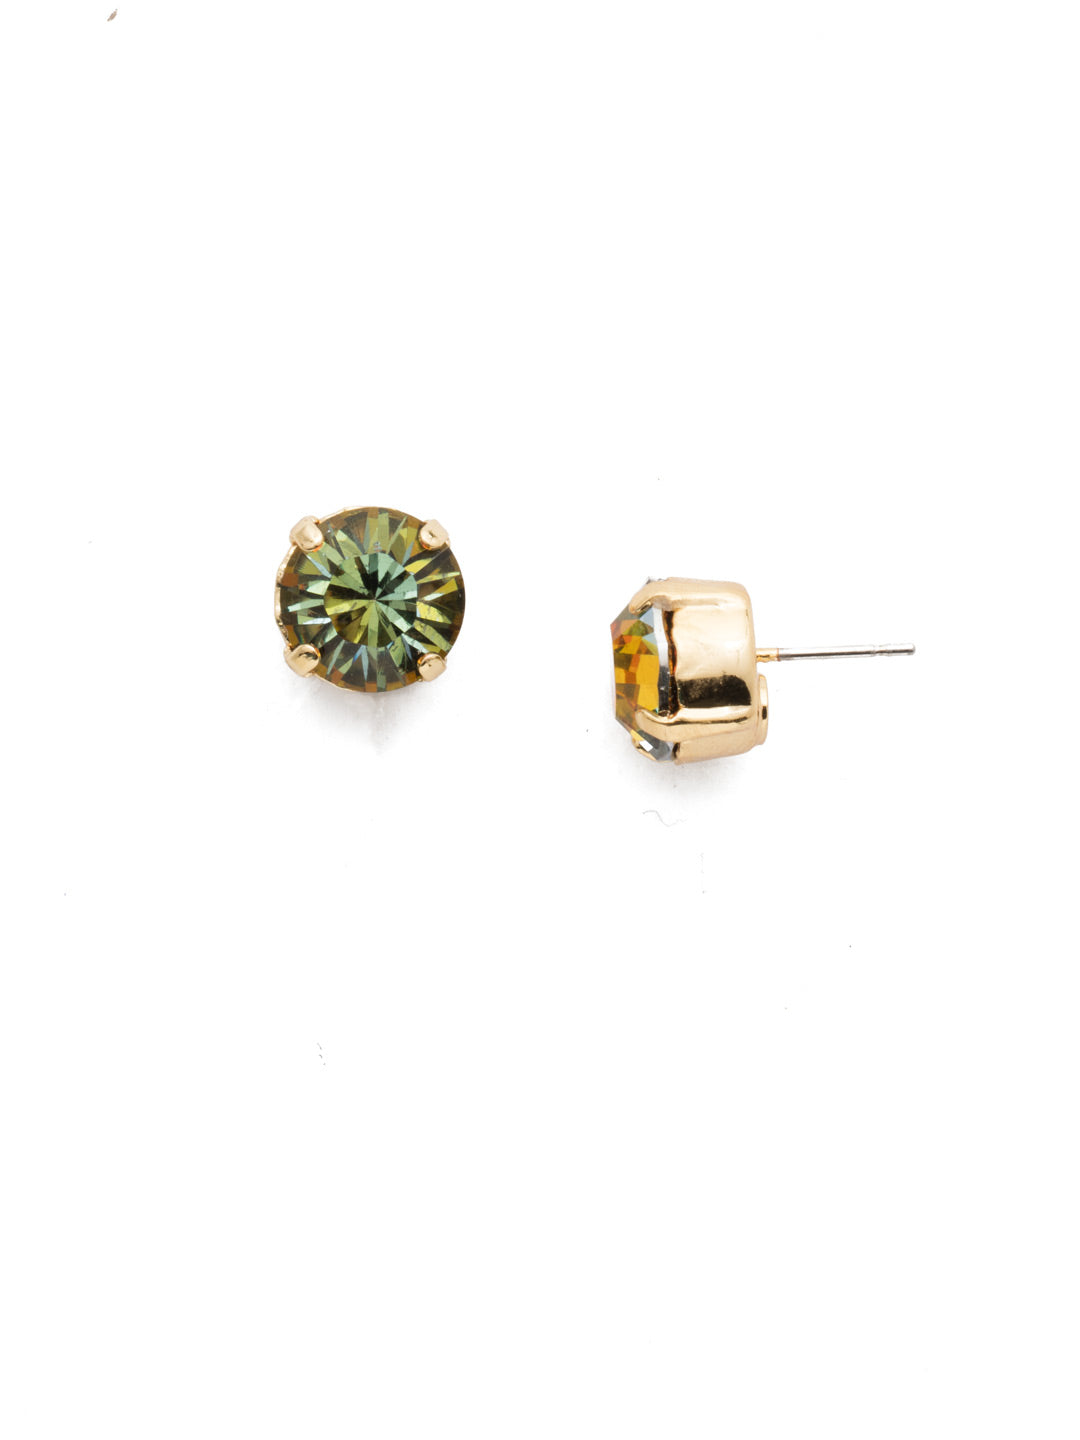 London Stud Earrings - ECM14BGCSM - <p>Everyone needs a great pair of studs. Add some classic sparkle to any occasion with these stud earrings. Need help picking a stud? <a href="https://www.sorrelli.com/blogs/sisterhood/round-stud-earrings-101-a-rundown-of-sizes-styles-and-sparkle">Check out our size guide!</a> From Sorrelli's Cashmere collection in our Bright Gold-tone finish.</p>